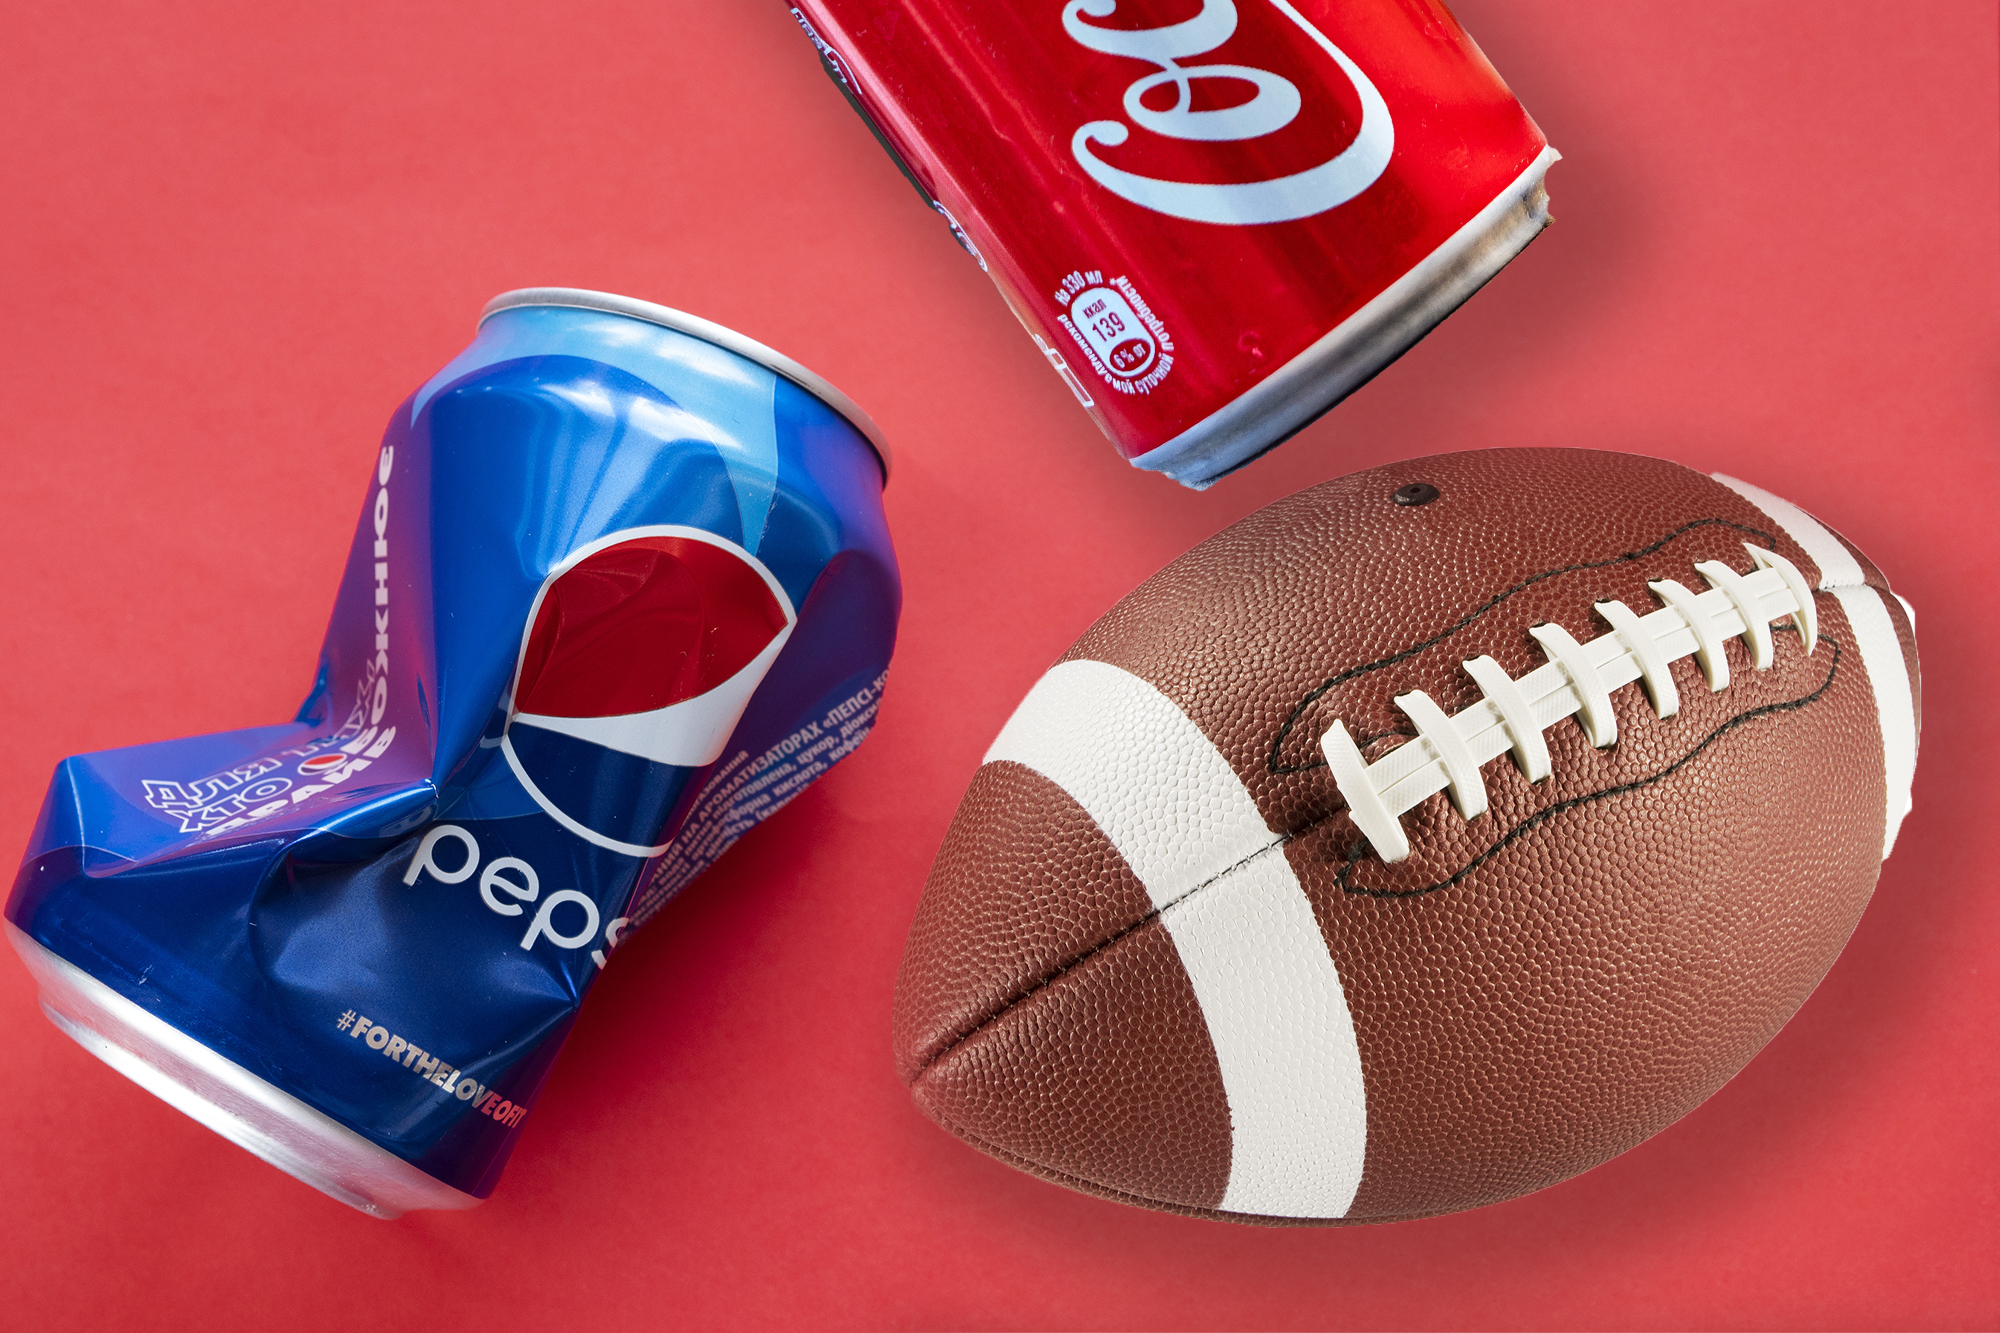 The Super Bowl 2021 will be missing some of its biggest advertisers this year, including Coke and Pepsi.